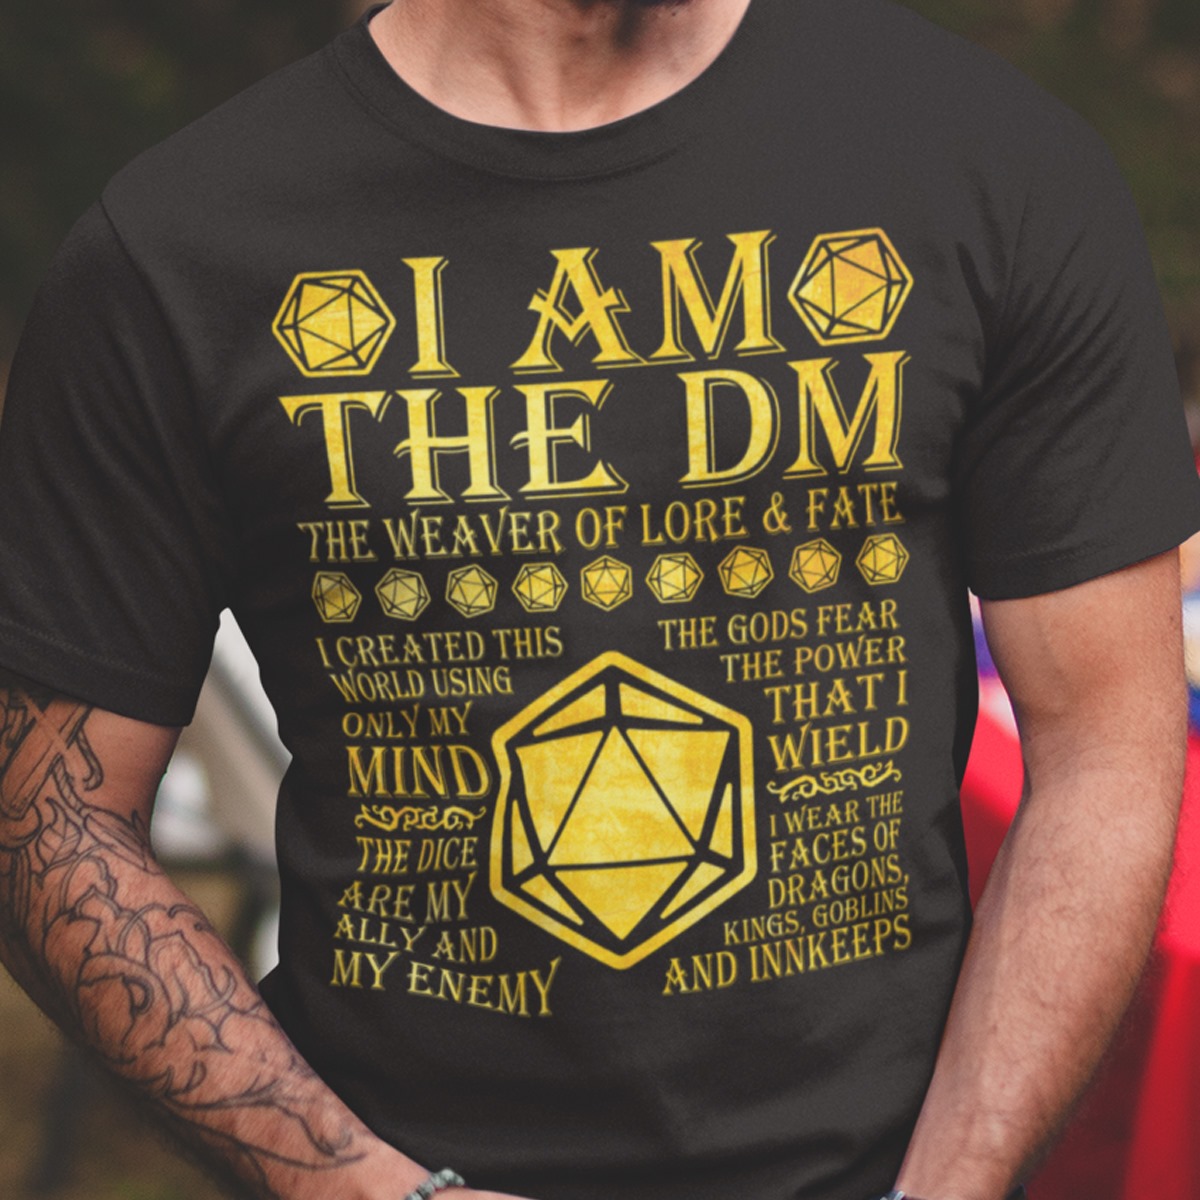 I am the DM the weaver of lore and fate - The dice are my ally and my enemy